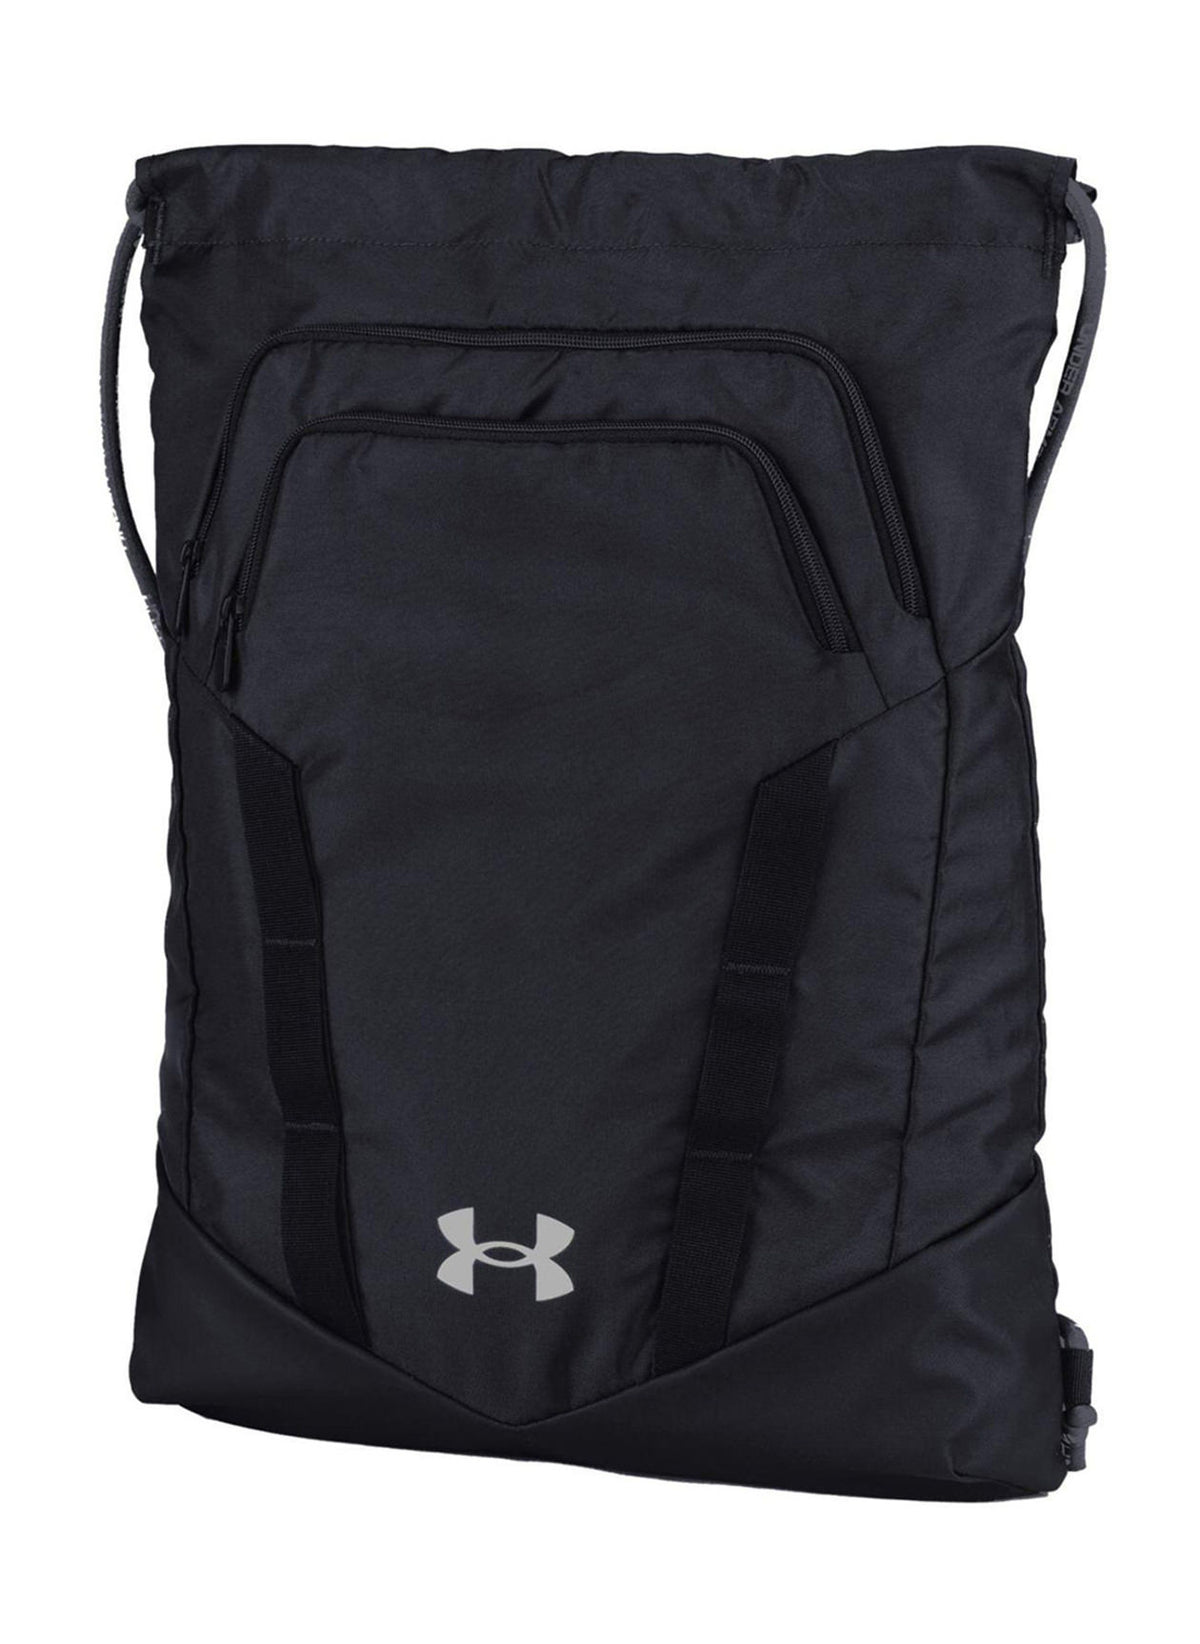 Under Armour Pitch Grey Novelty Undeniable Sackpack 2.0 |  Under Armour 瀝青灰色客製背包